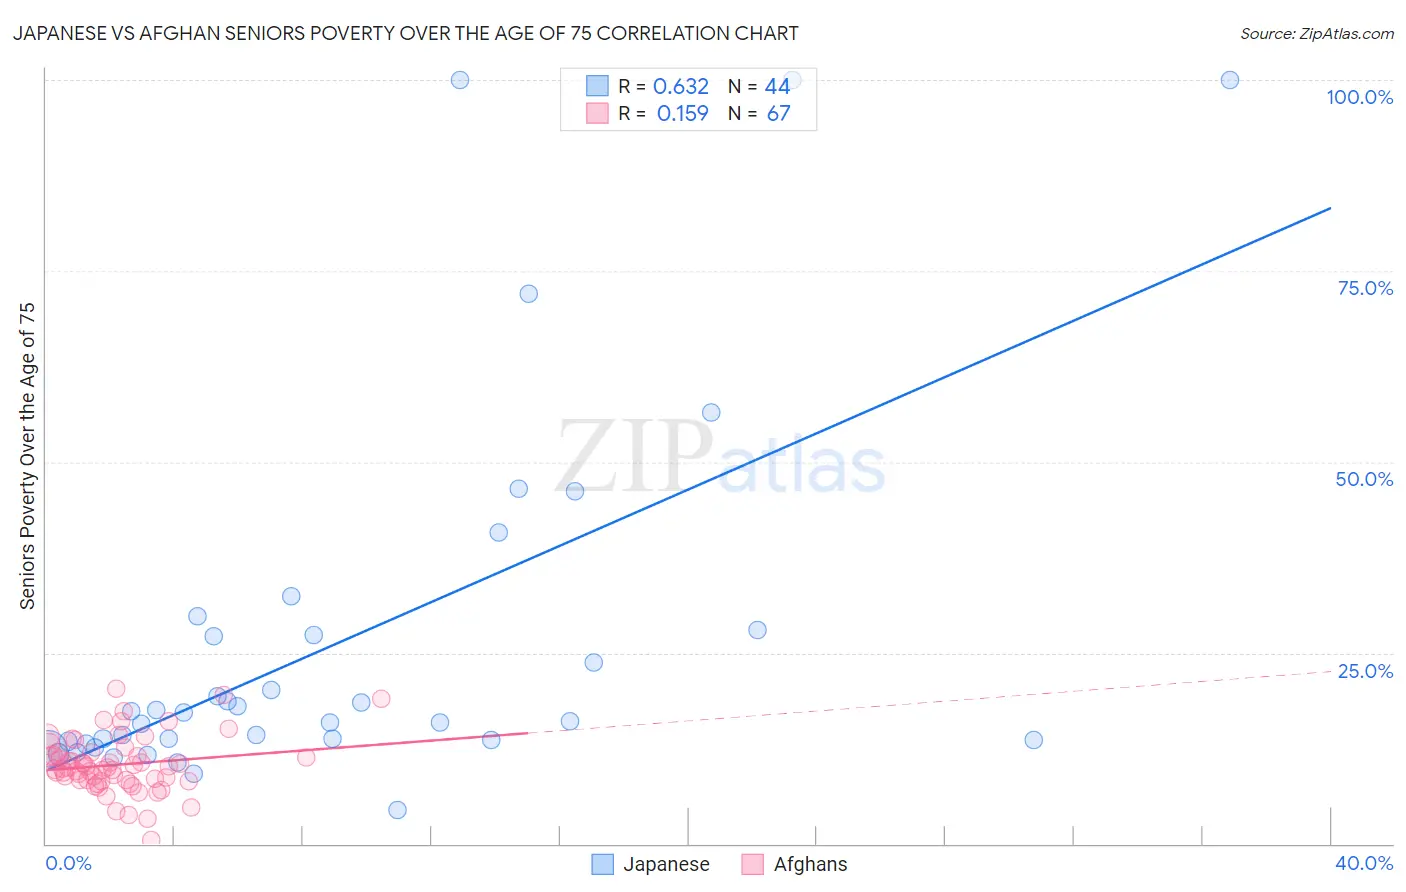 Japanese vs Afghan Seniors Poverty Over the Age of 75